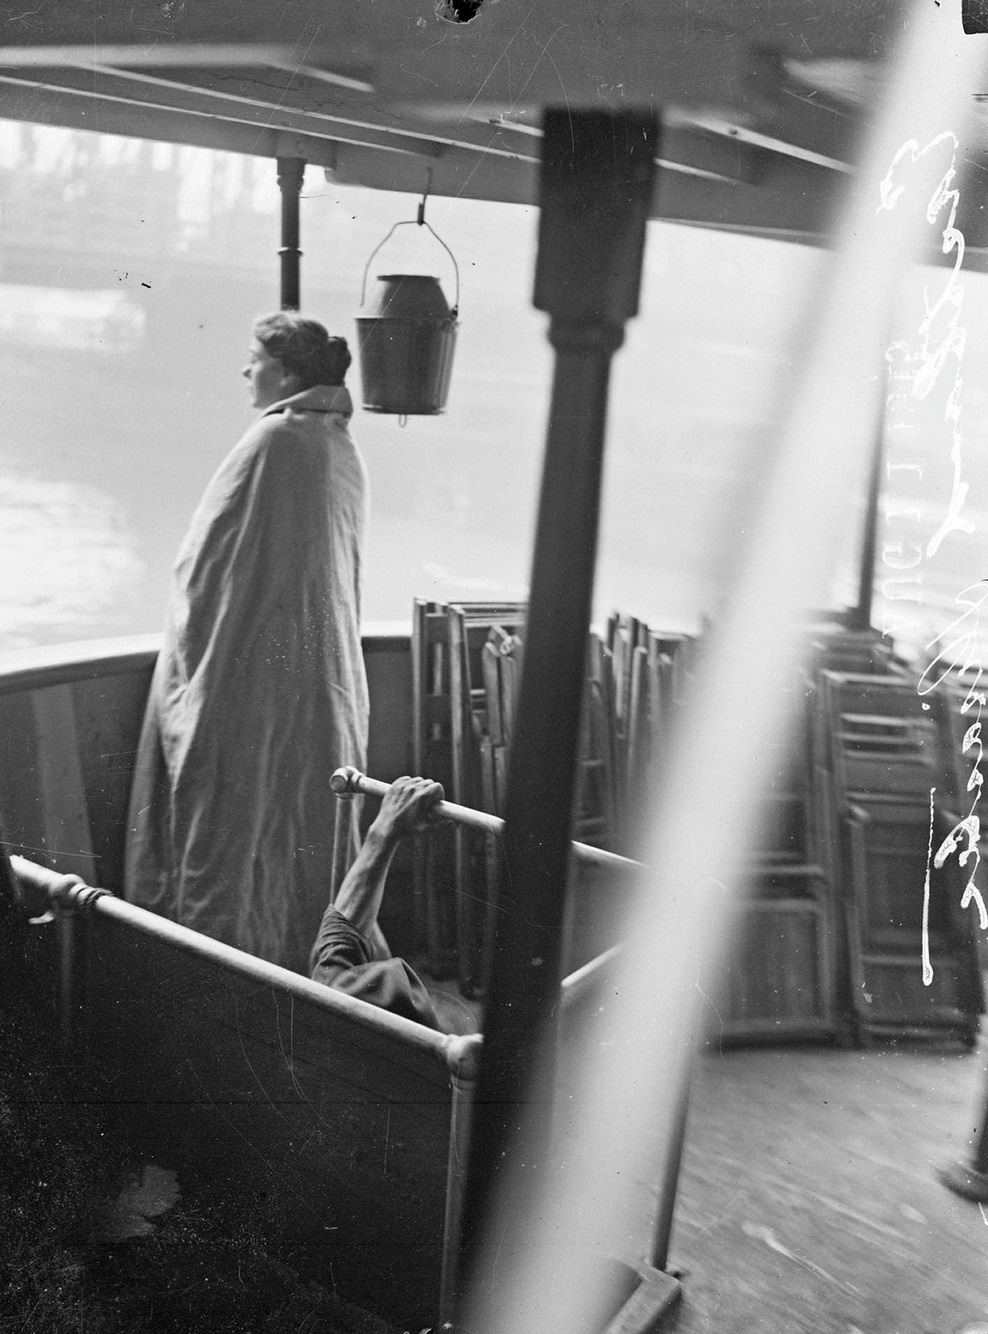 Eastland disaster, female survivor, wrapped in a blanket, standing on upper deck of a boat, Chicago, Illinois, July 24, 1915.